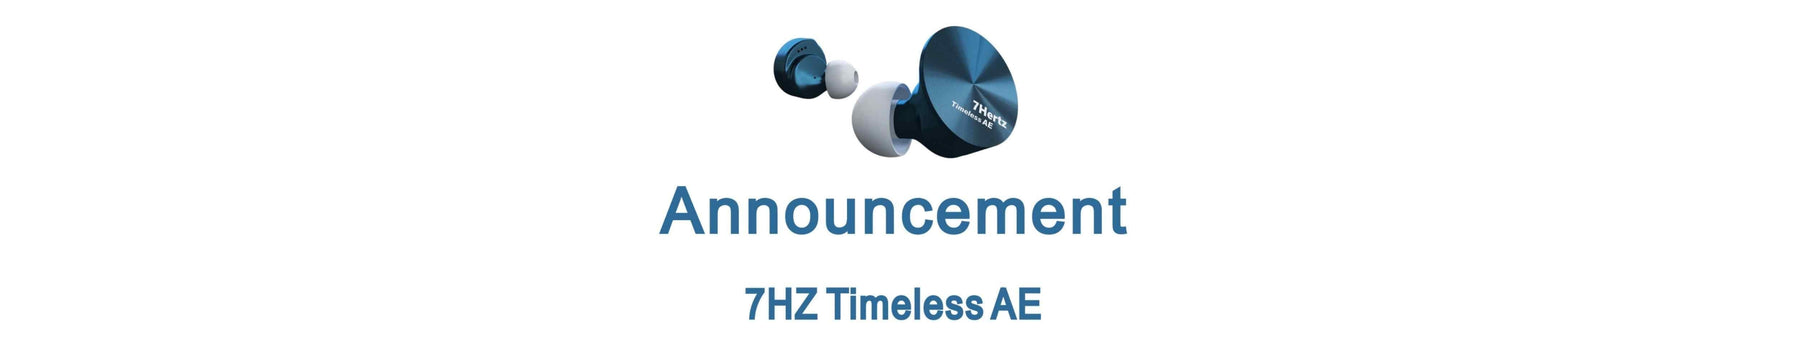 Three New Updates With All-New 7Hz Timeless AE: New Tuning, New Cable, etc.